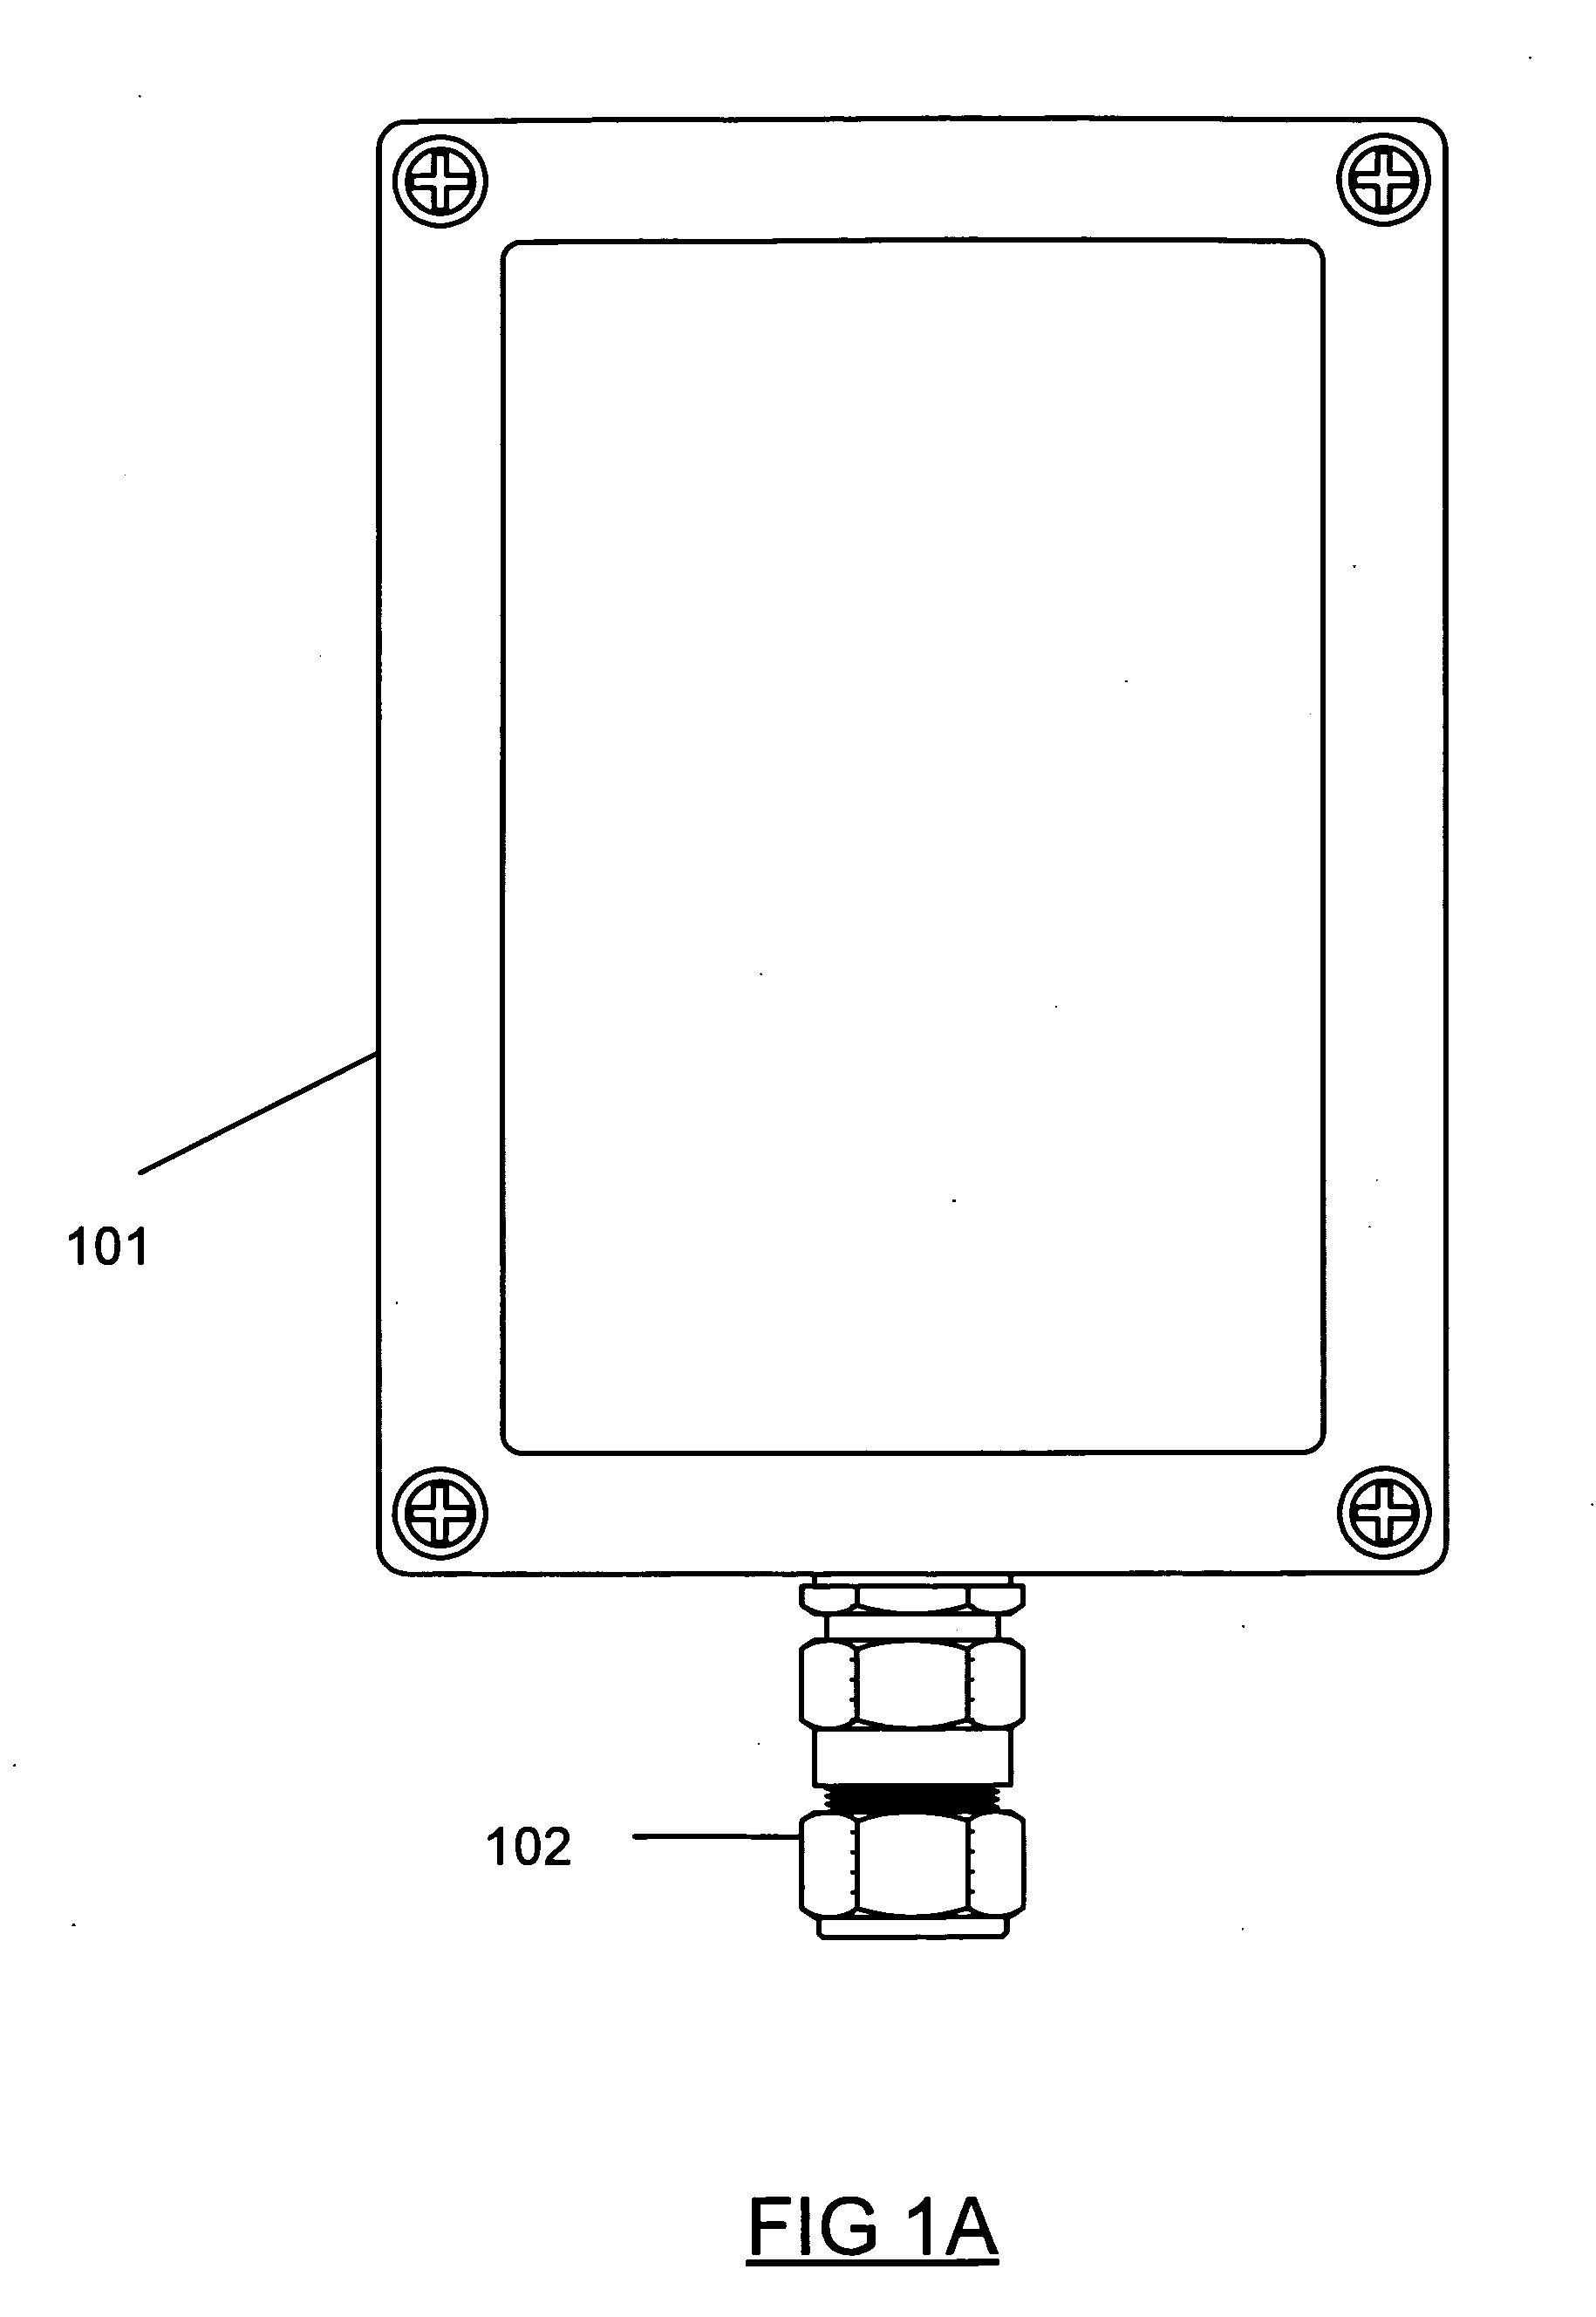 System and method for railway vehicle detection